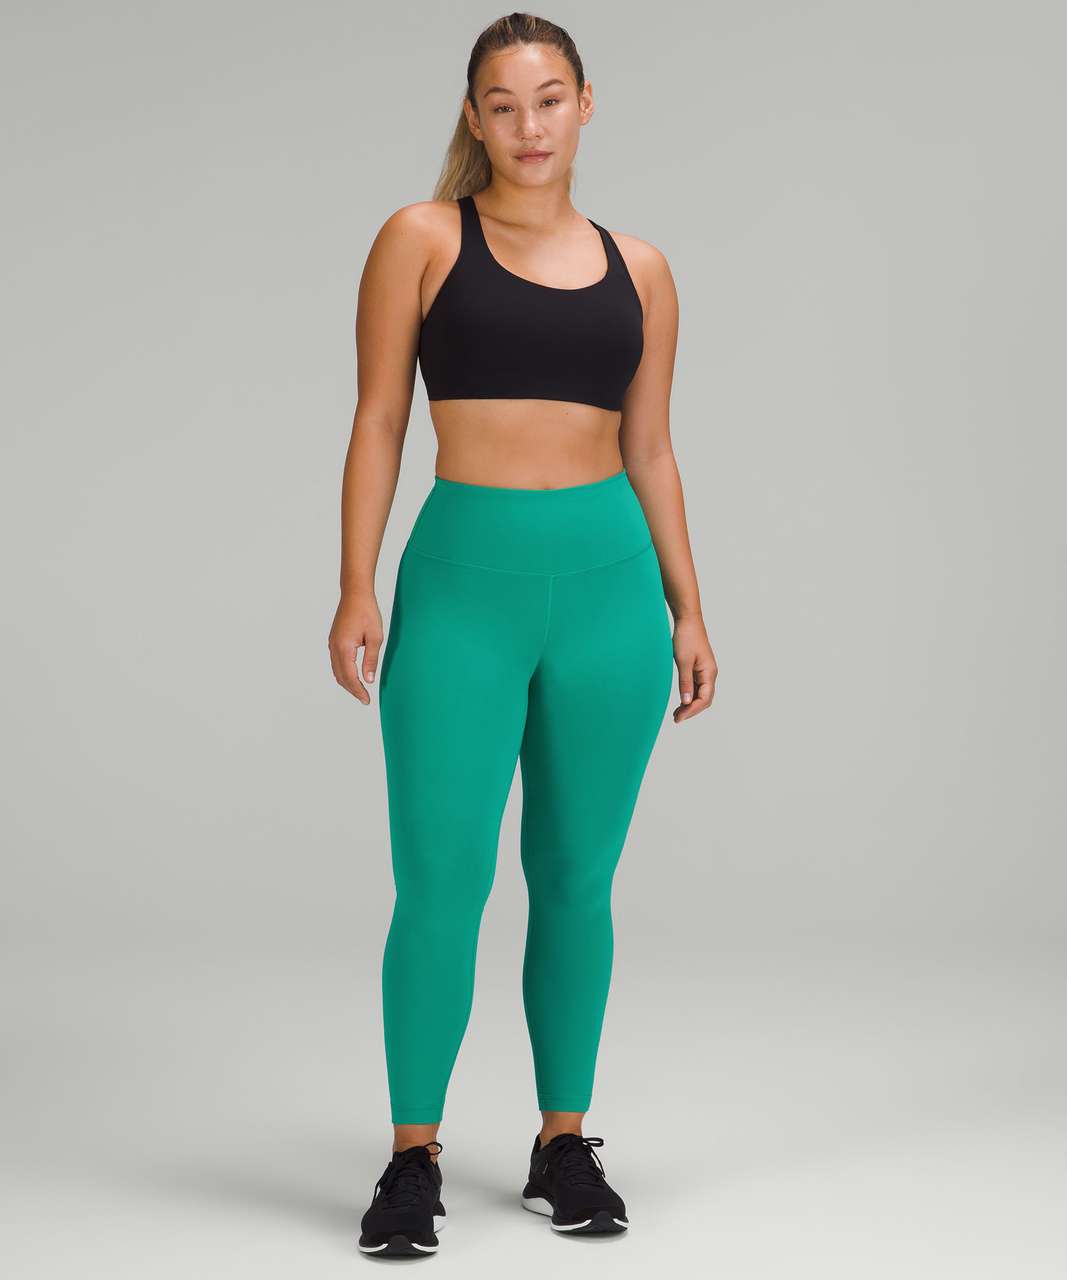 Recent In-Store Try-Ons: Poolside 21” Aligns, Wunder Train 4” Shorts and  Wunder Train *Contour 25” Pants : r/lululemon